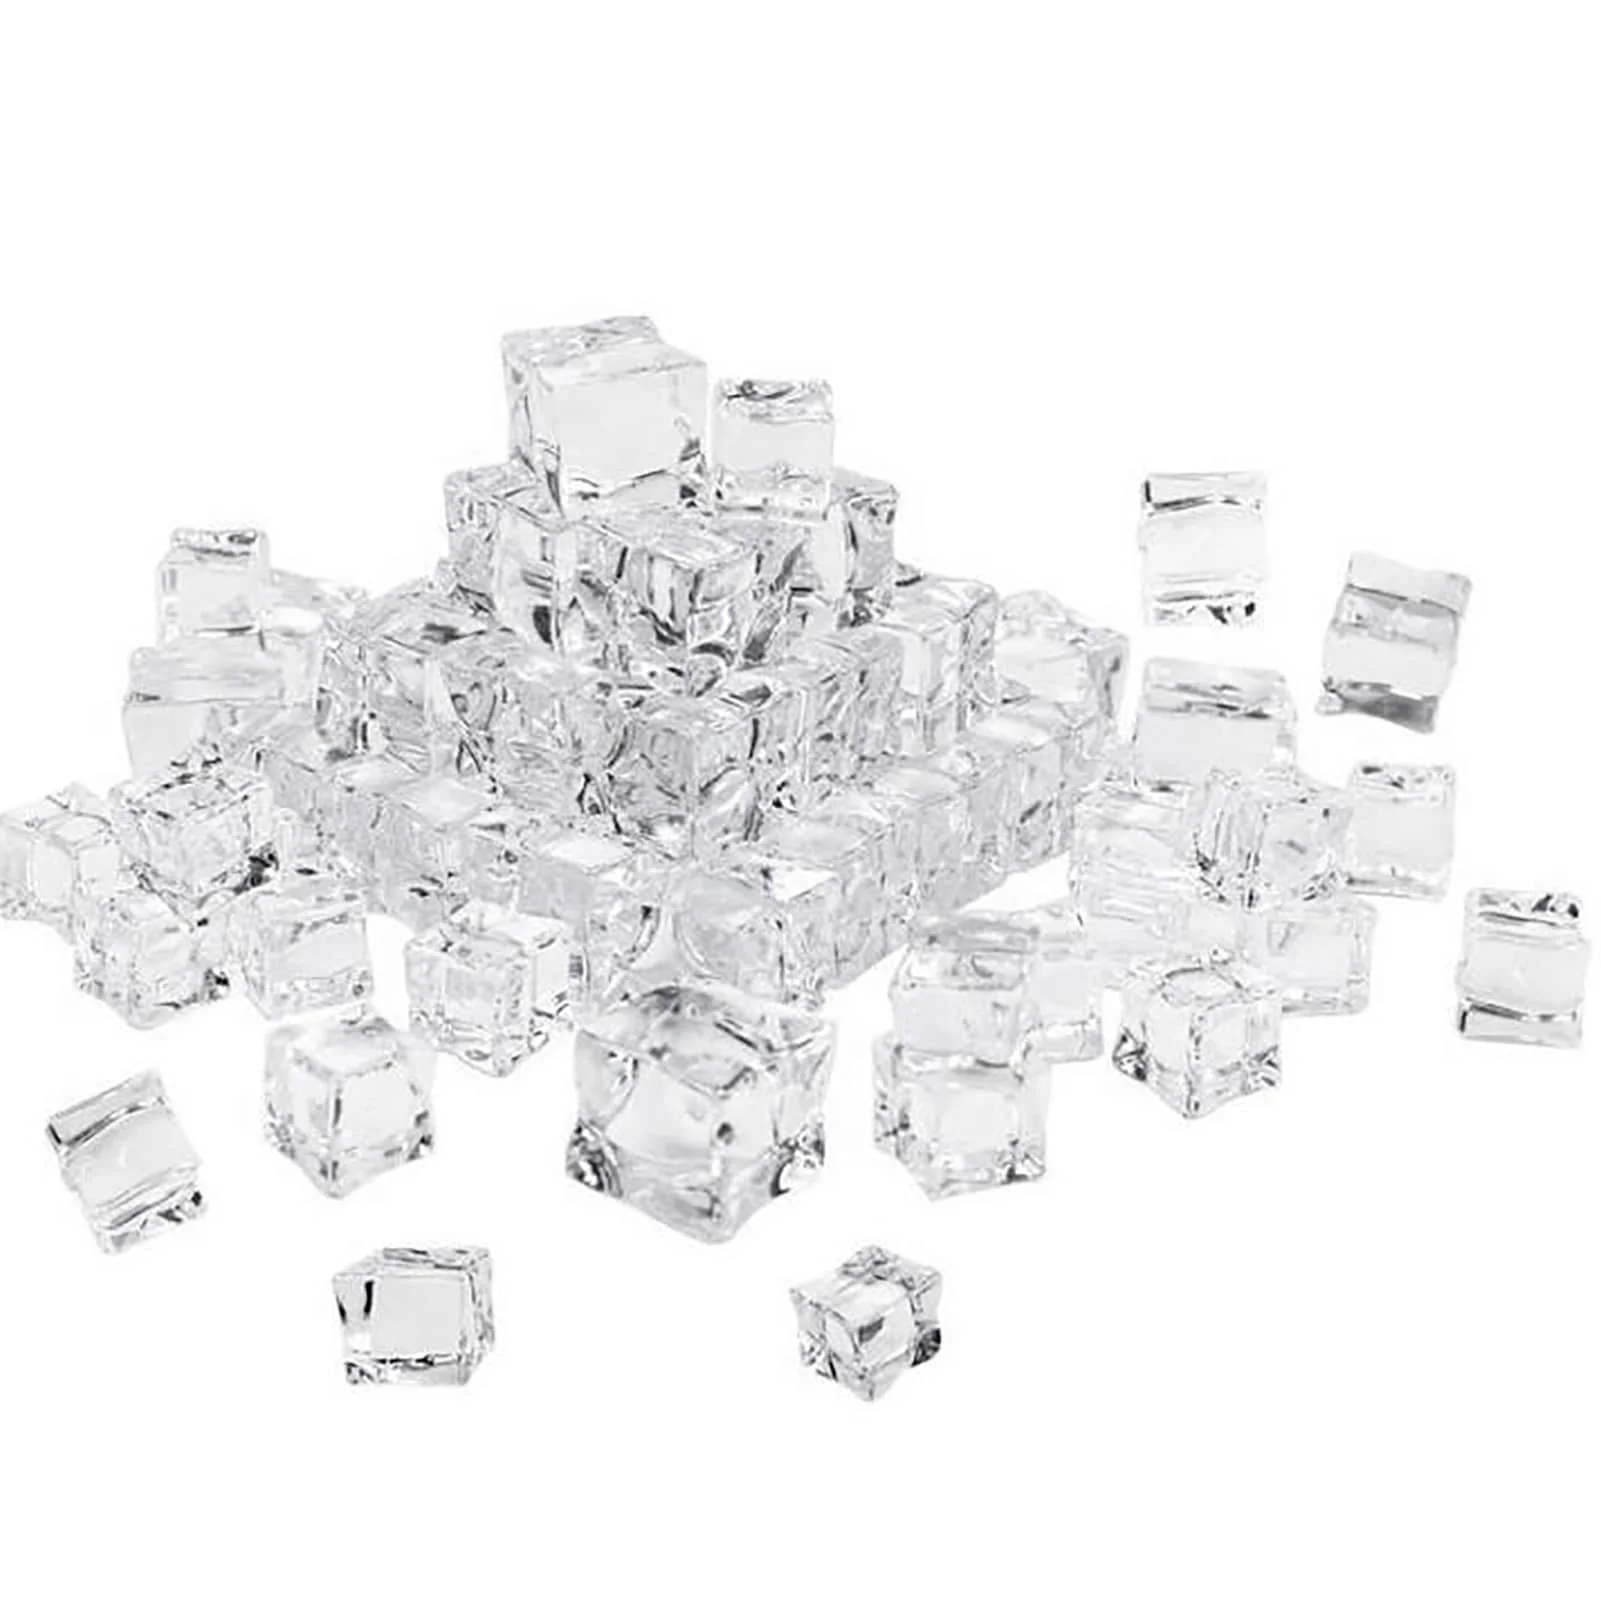 50Pcs Fake Ice Cubes Reusable Artificial Clear Acrylic Crystal Cubes Whisky Drinks Display Photography Props Wedding Party Decor